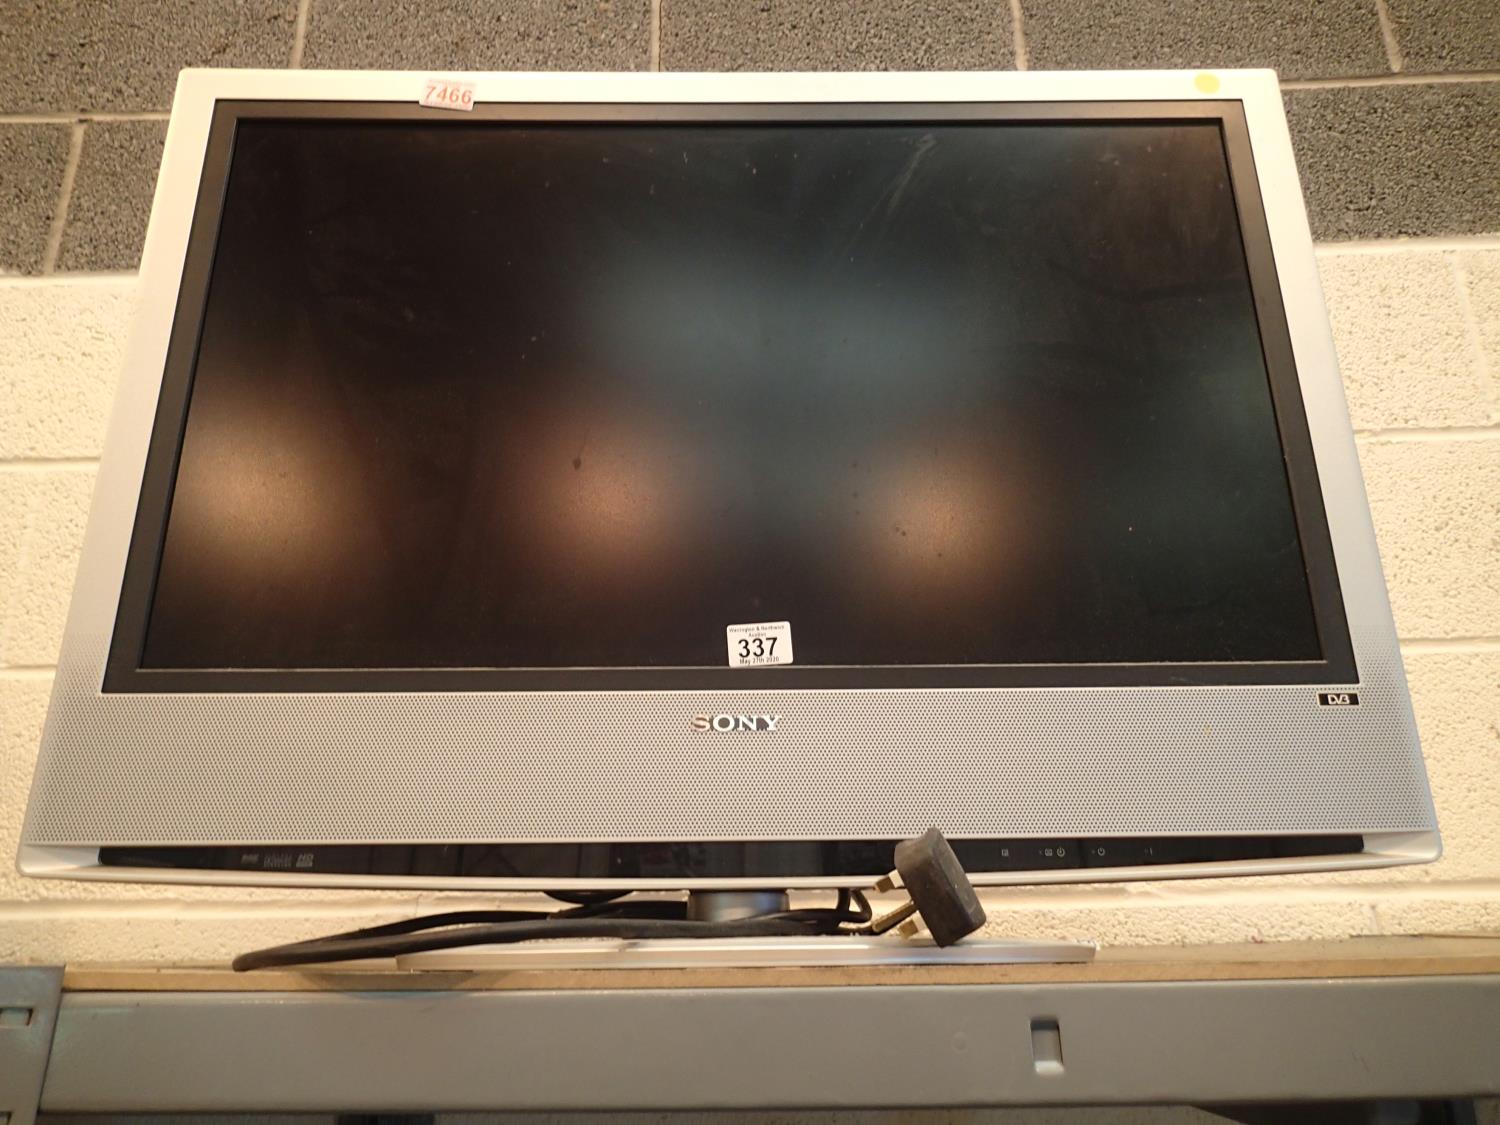 Sony KDL-532A12U 32'' LCD colour TV (remote in office pre lot 7466). This lot is not available for